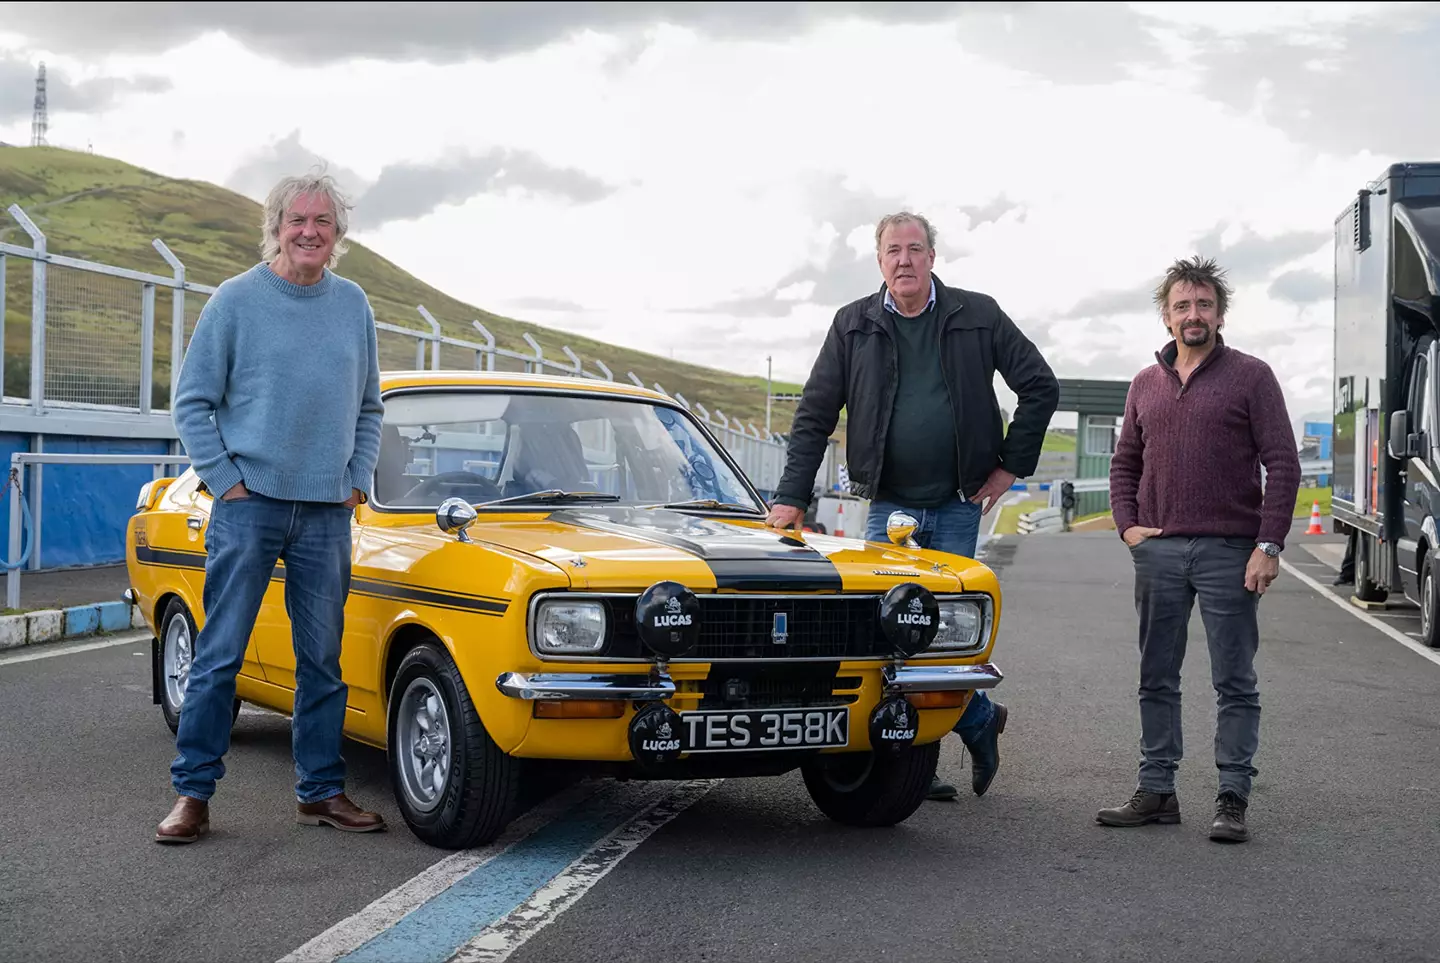 The three presenters returned for The Grand Tour series.